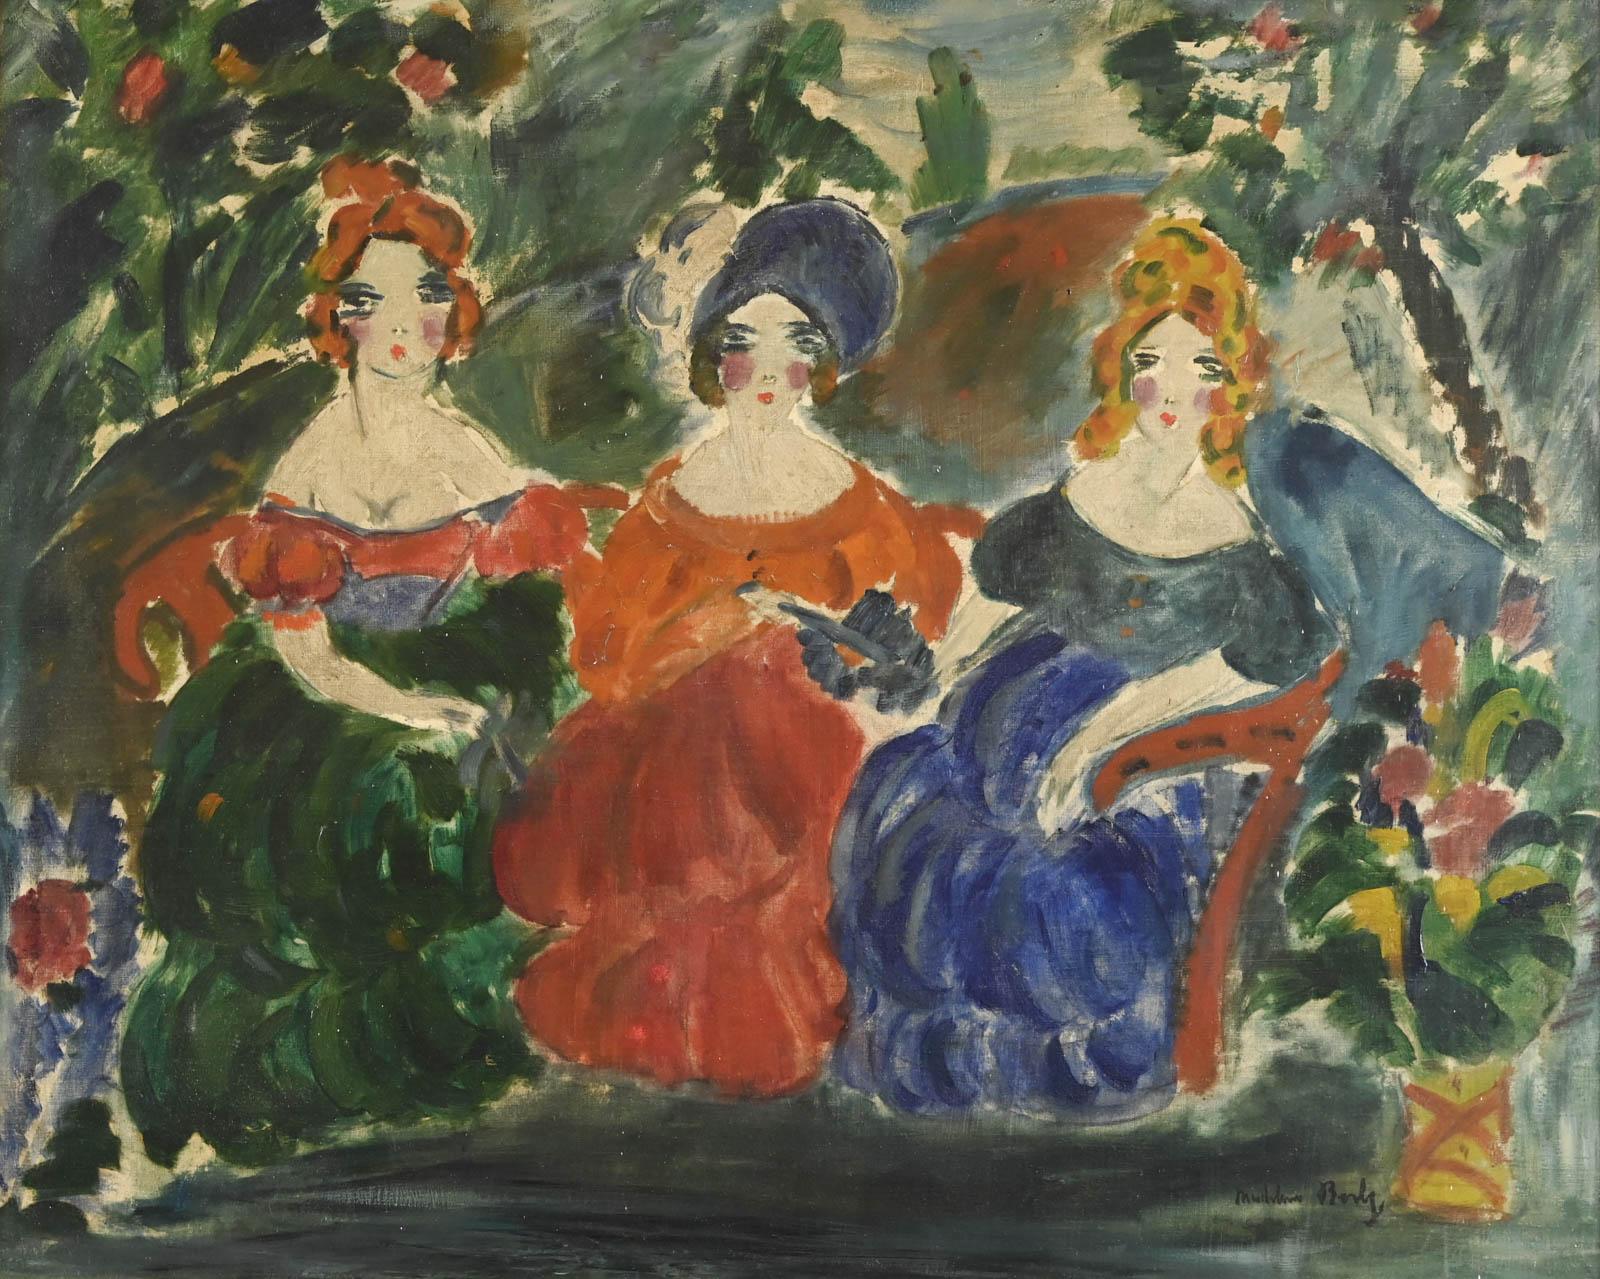 Madeleine BERLY VLAMINCK (1896-1953)

Femmes dans le jardin

Oil on canvas
Size:  65 x 81 cm
Signed lower right

Provenance: Private collection in Normandy.

Oil on canvas in good condition.
Original canvas
Label on the back from Galerie Paul